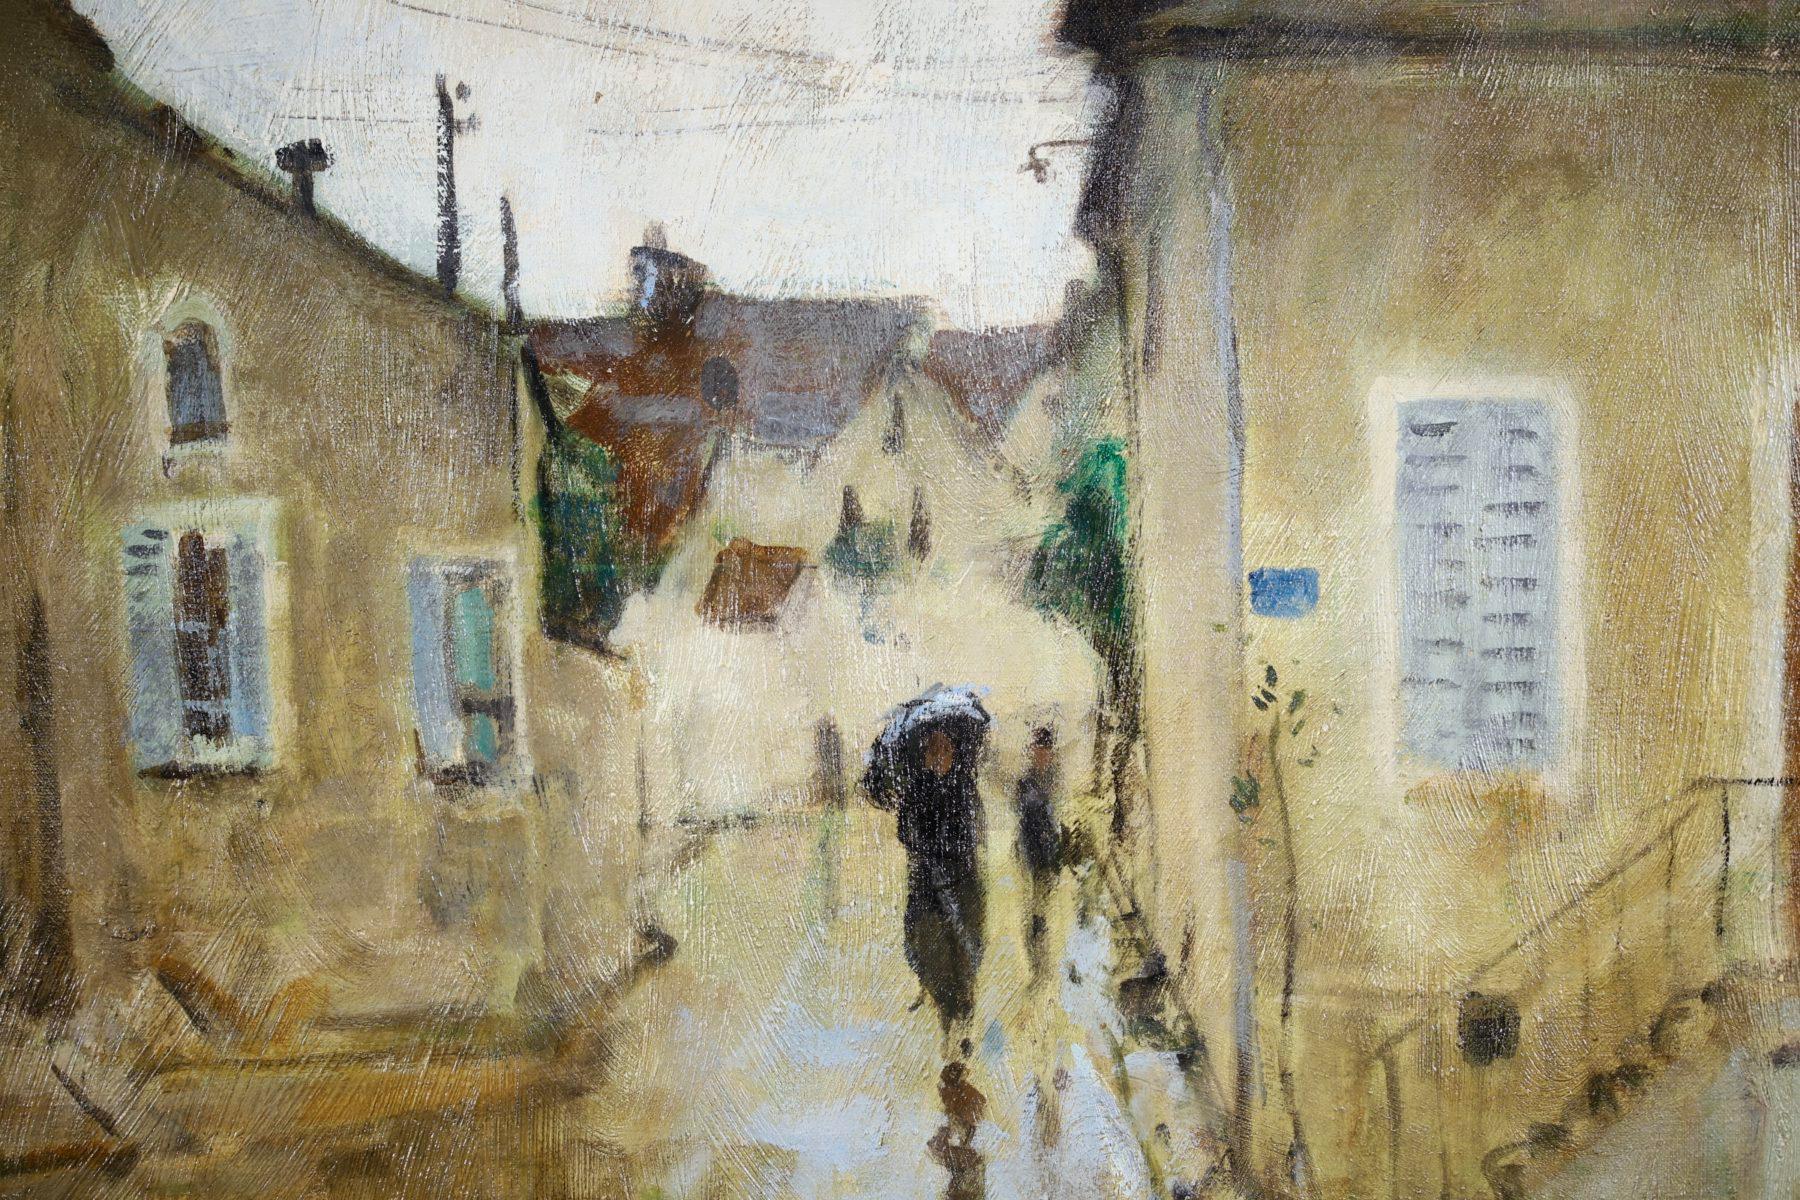 A stunning oil on canvas circa 1910 by sought after French post impressionist painter Pierre Eugène Montezin. The piece depicts a black figure walking along a village street in Saint Mammes between two rows of houses, clutching an umbrella on a